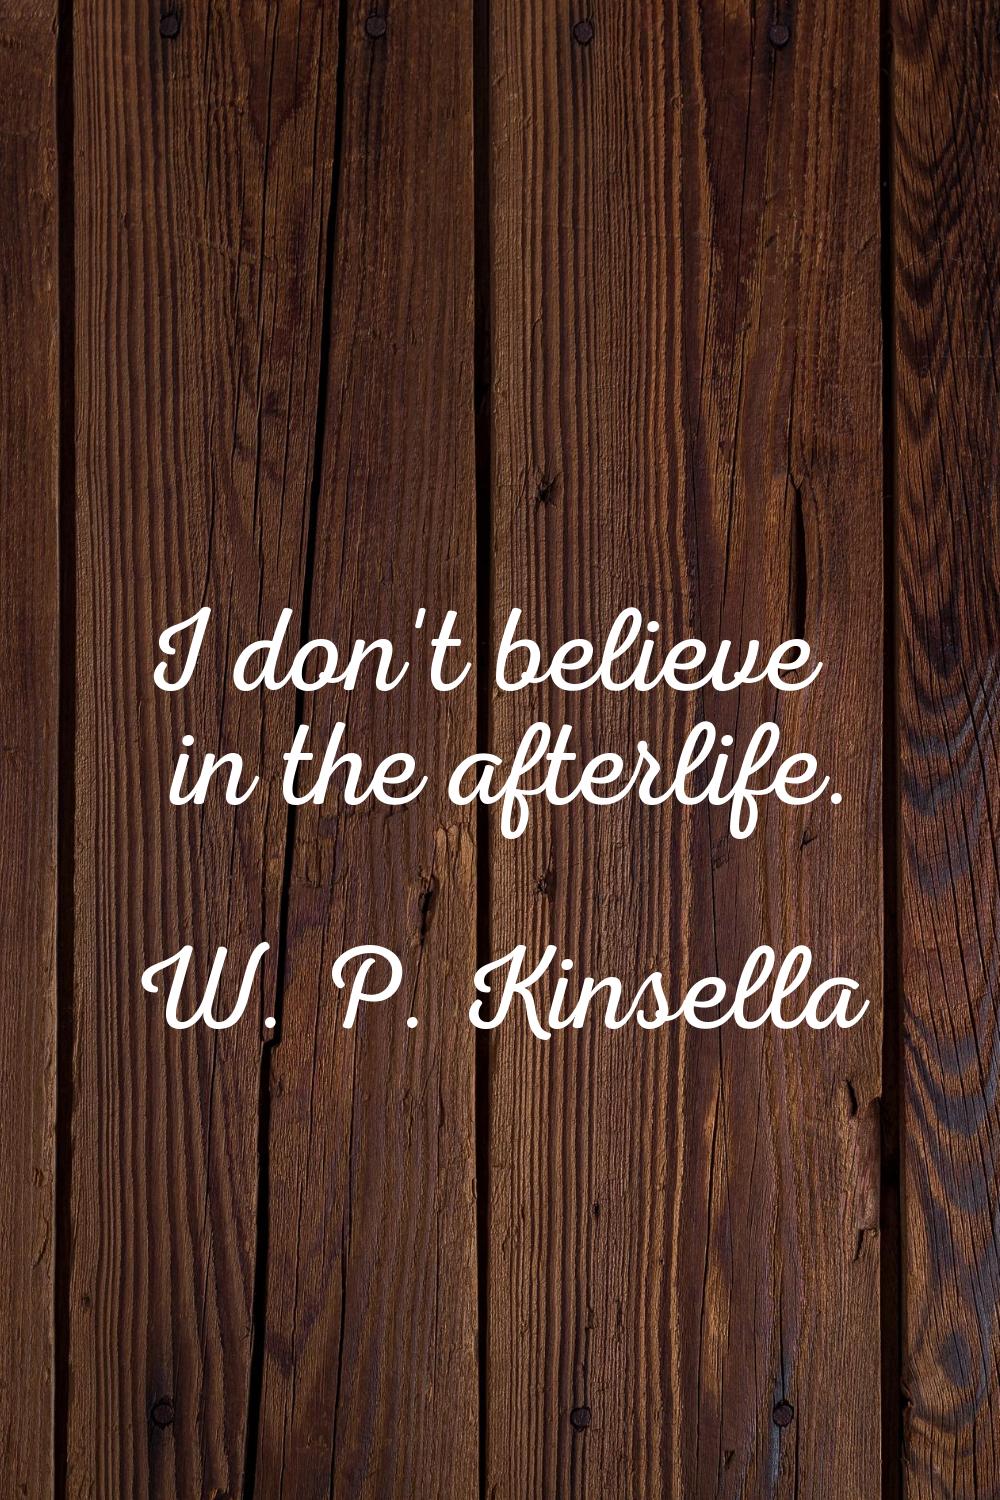 I don't believe in the afterlife.